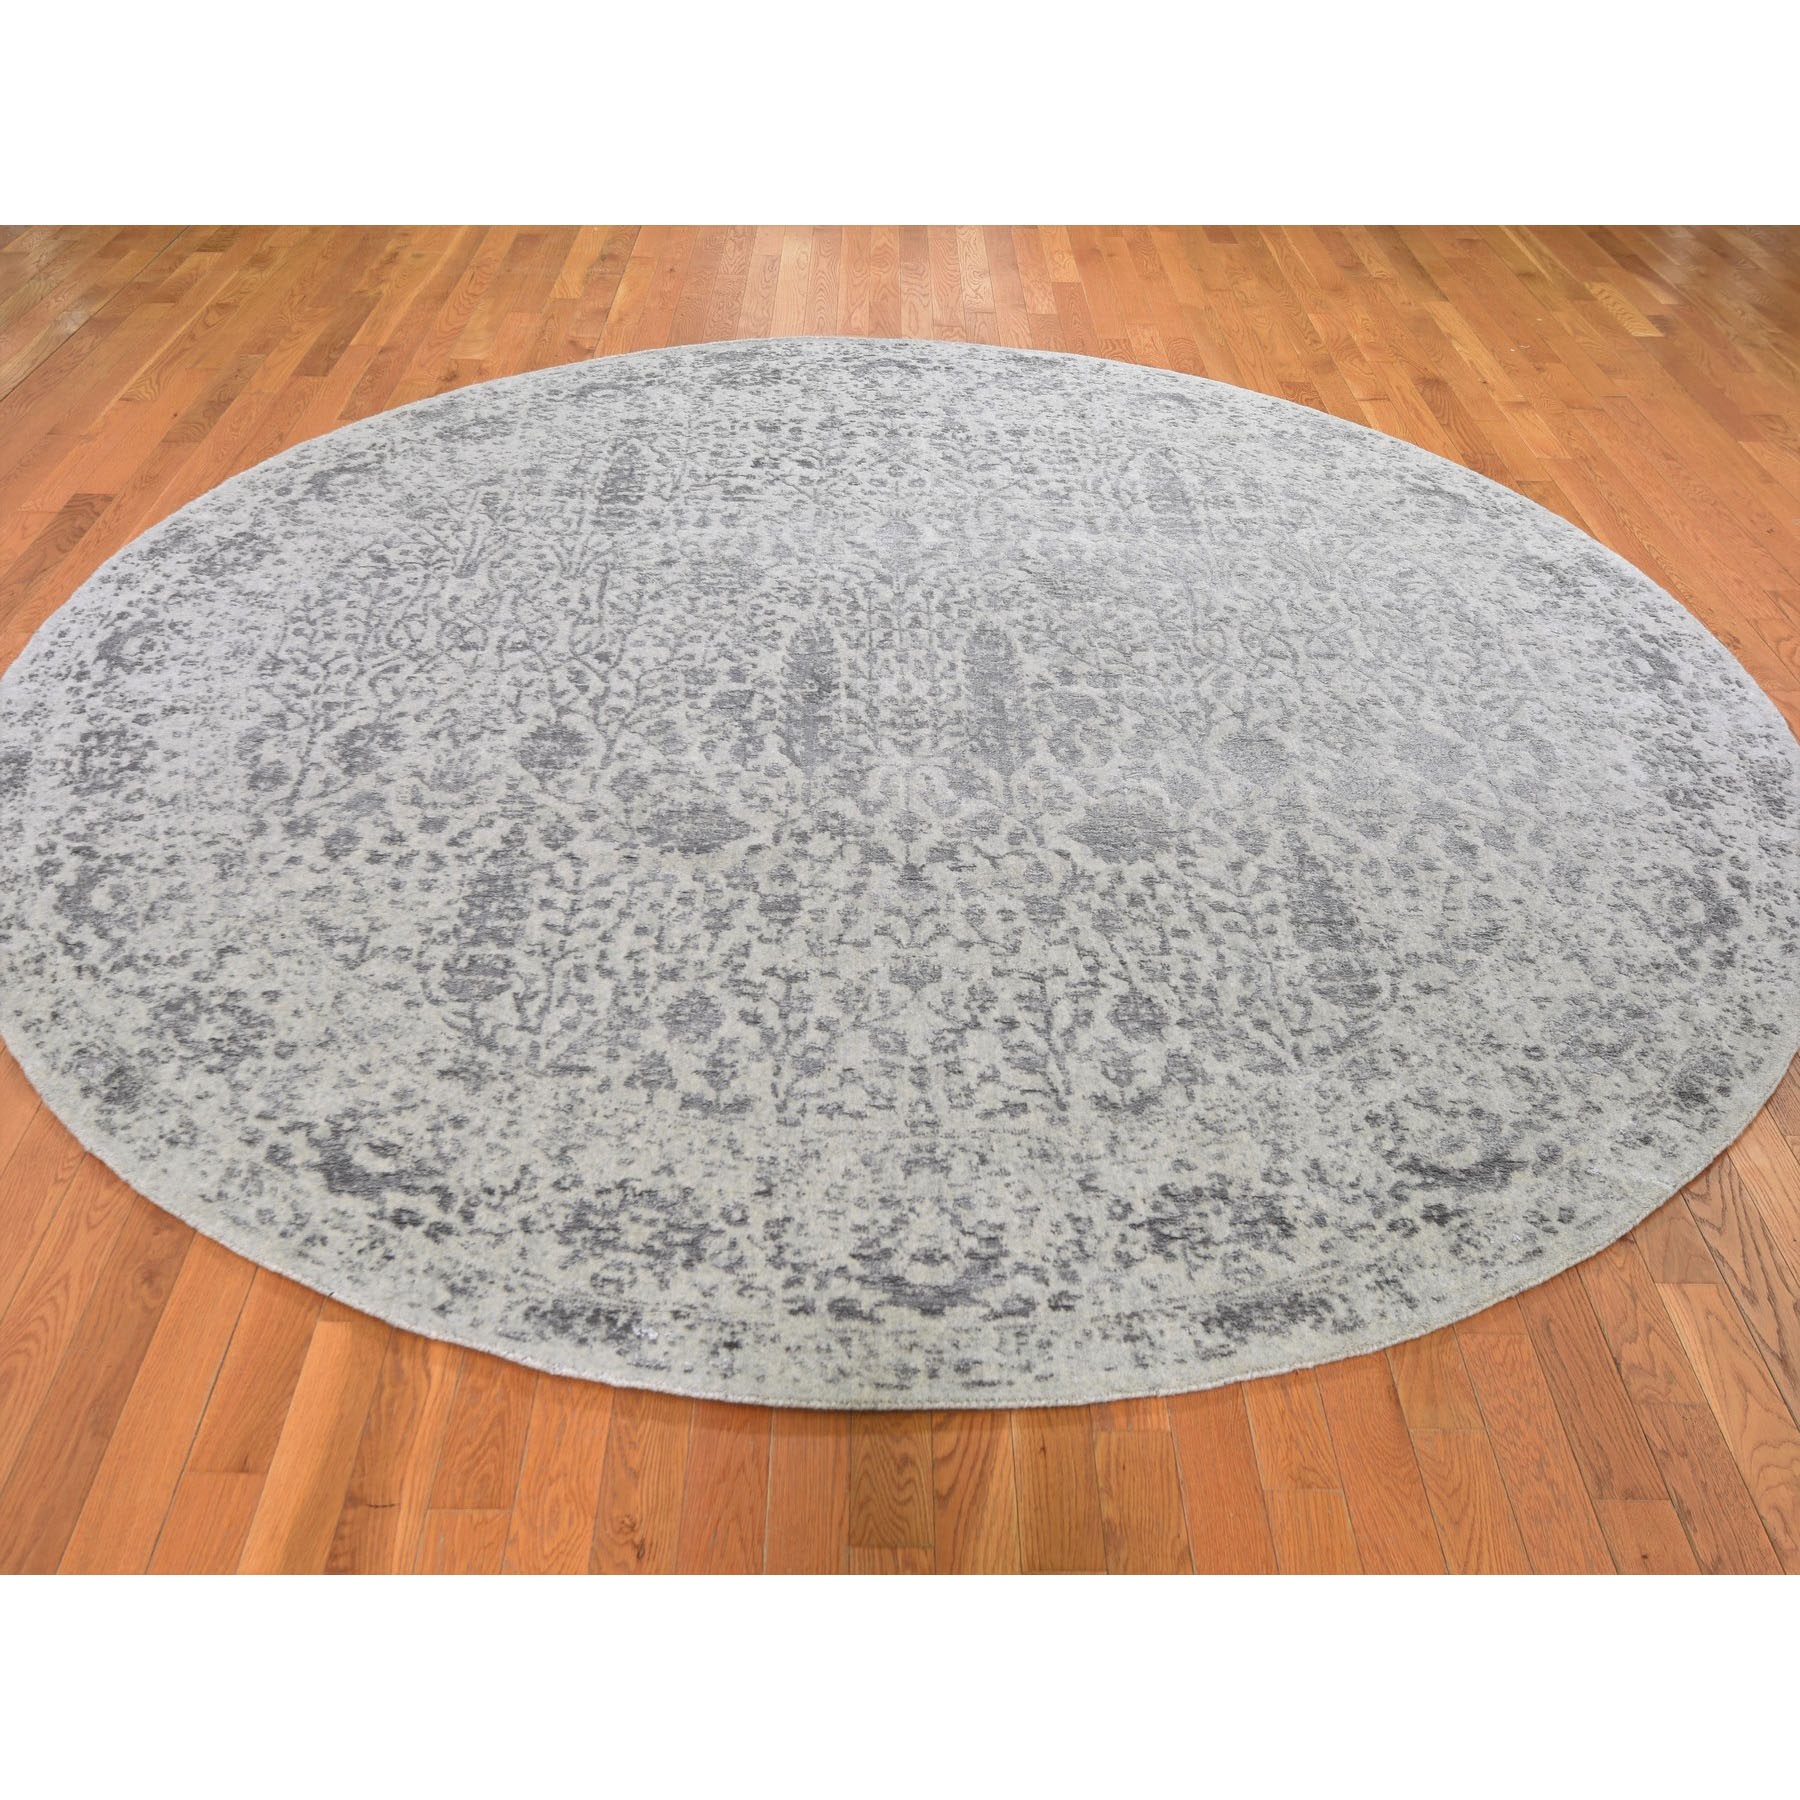 10-x10- jacquard Hand Loomed Gray Broken Cypress Tree Design Wool And Silk Thick And Plush Round Oriental Rug 